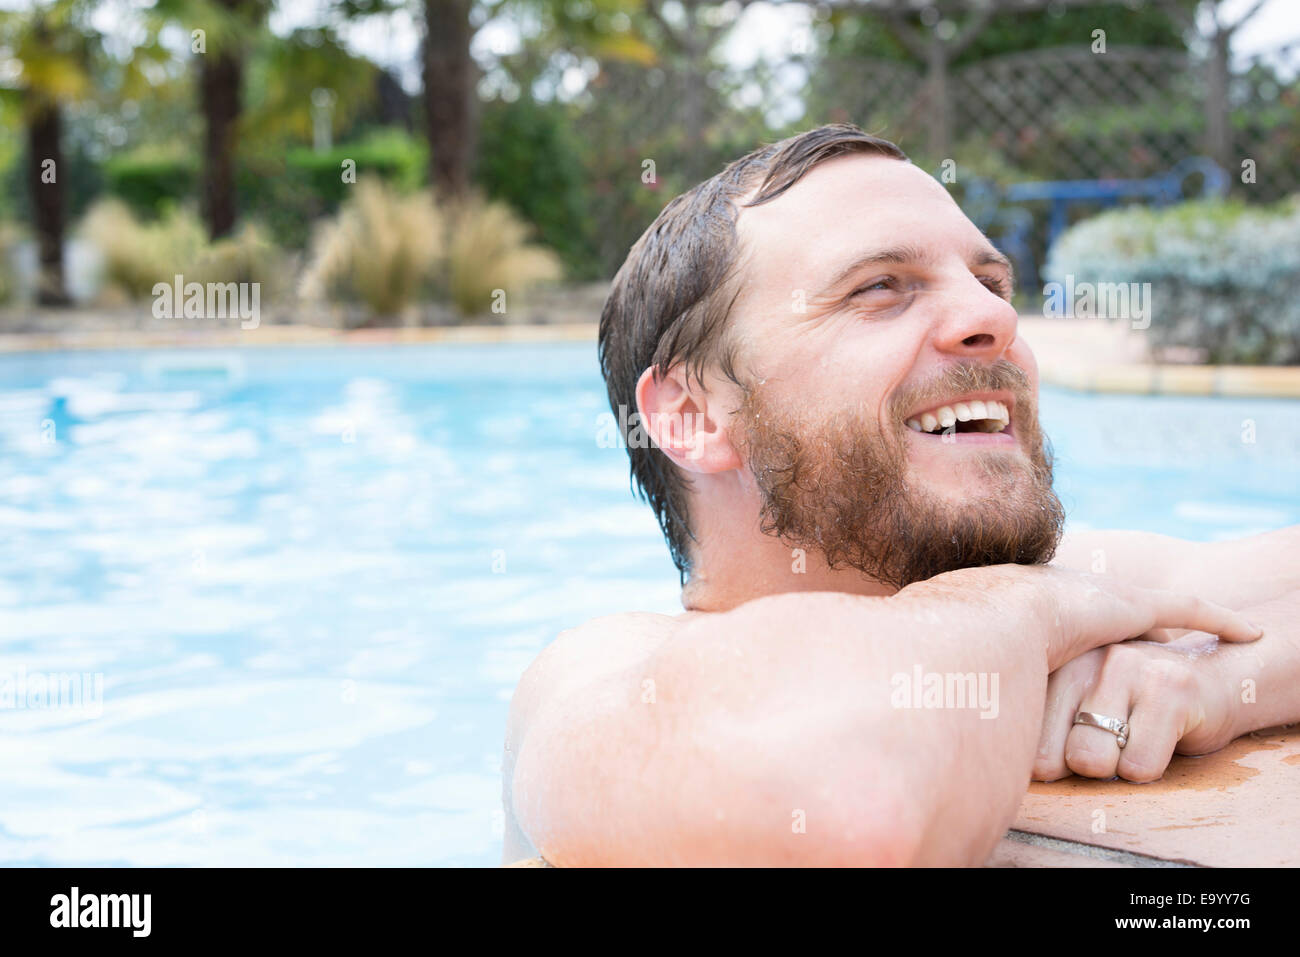 Man leaning on edge of pool Stock Photo